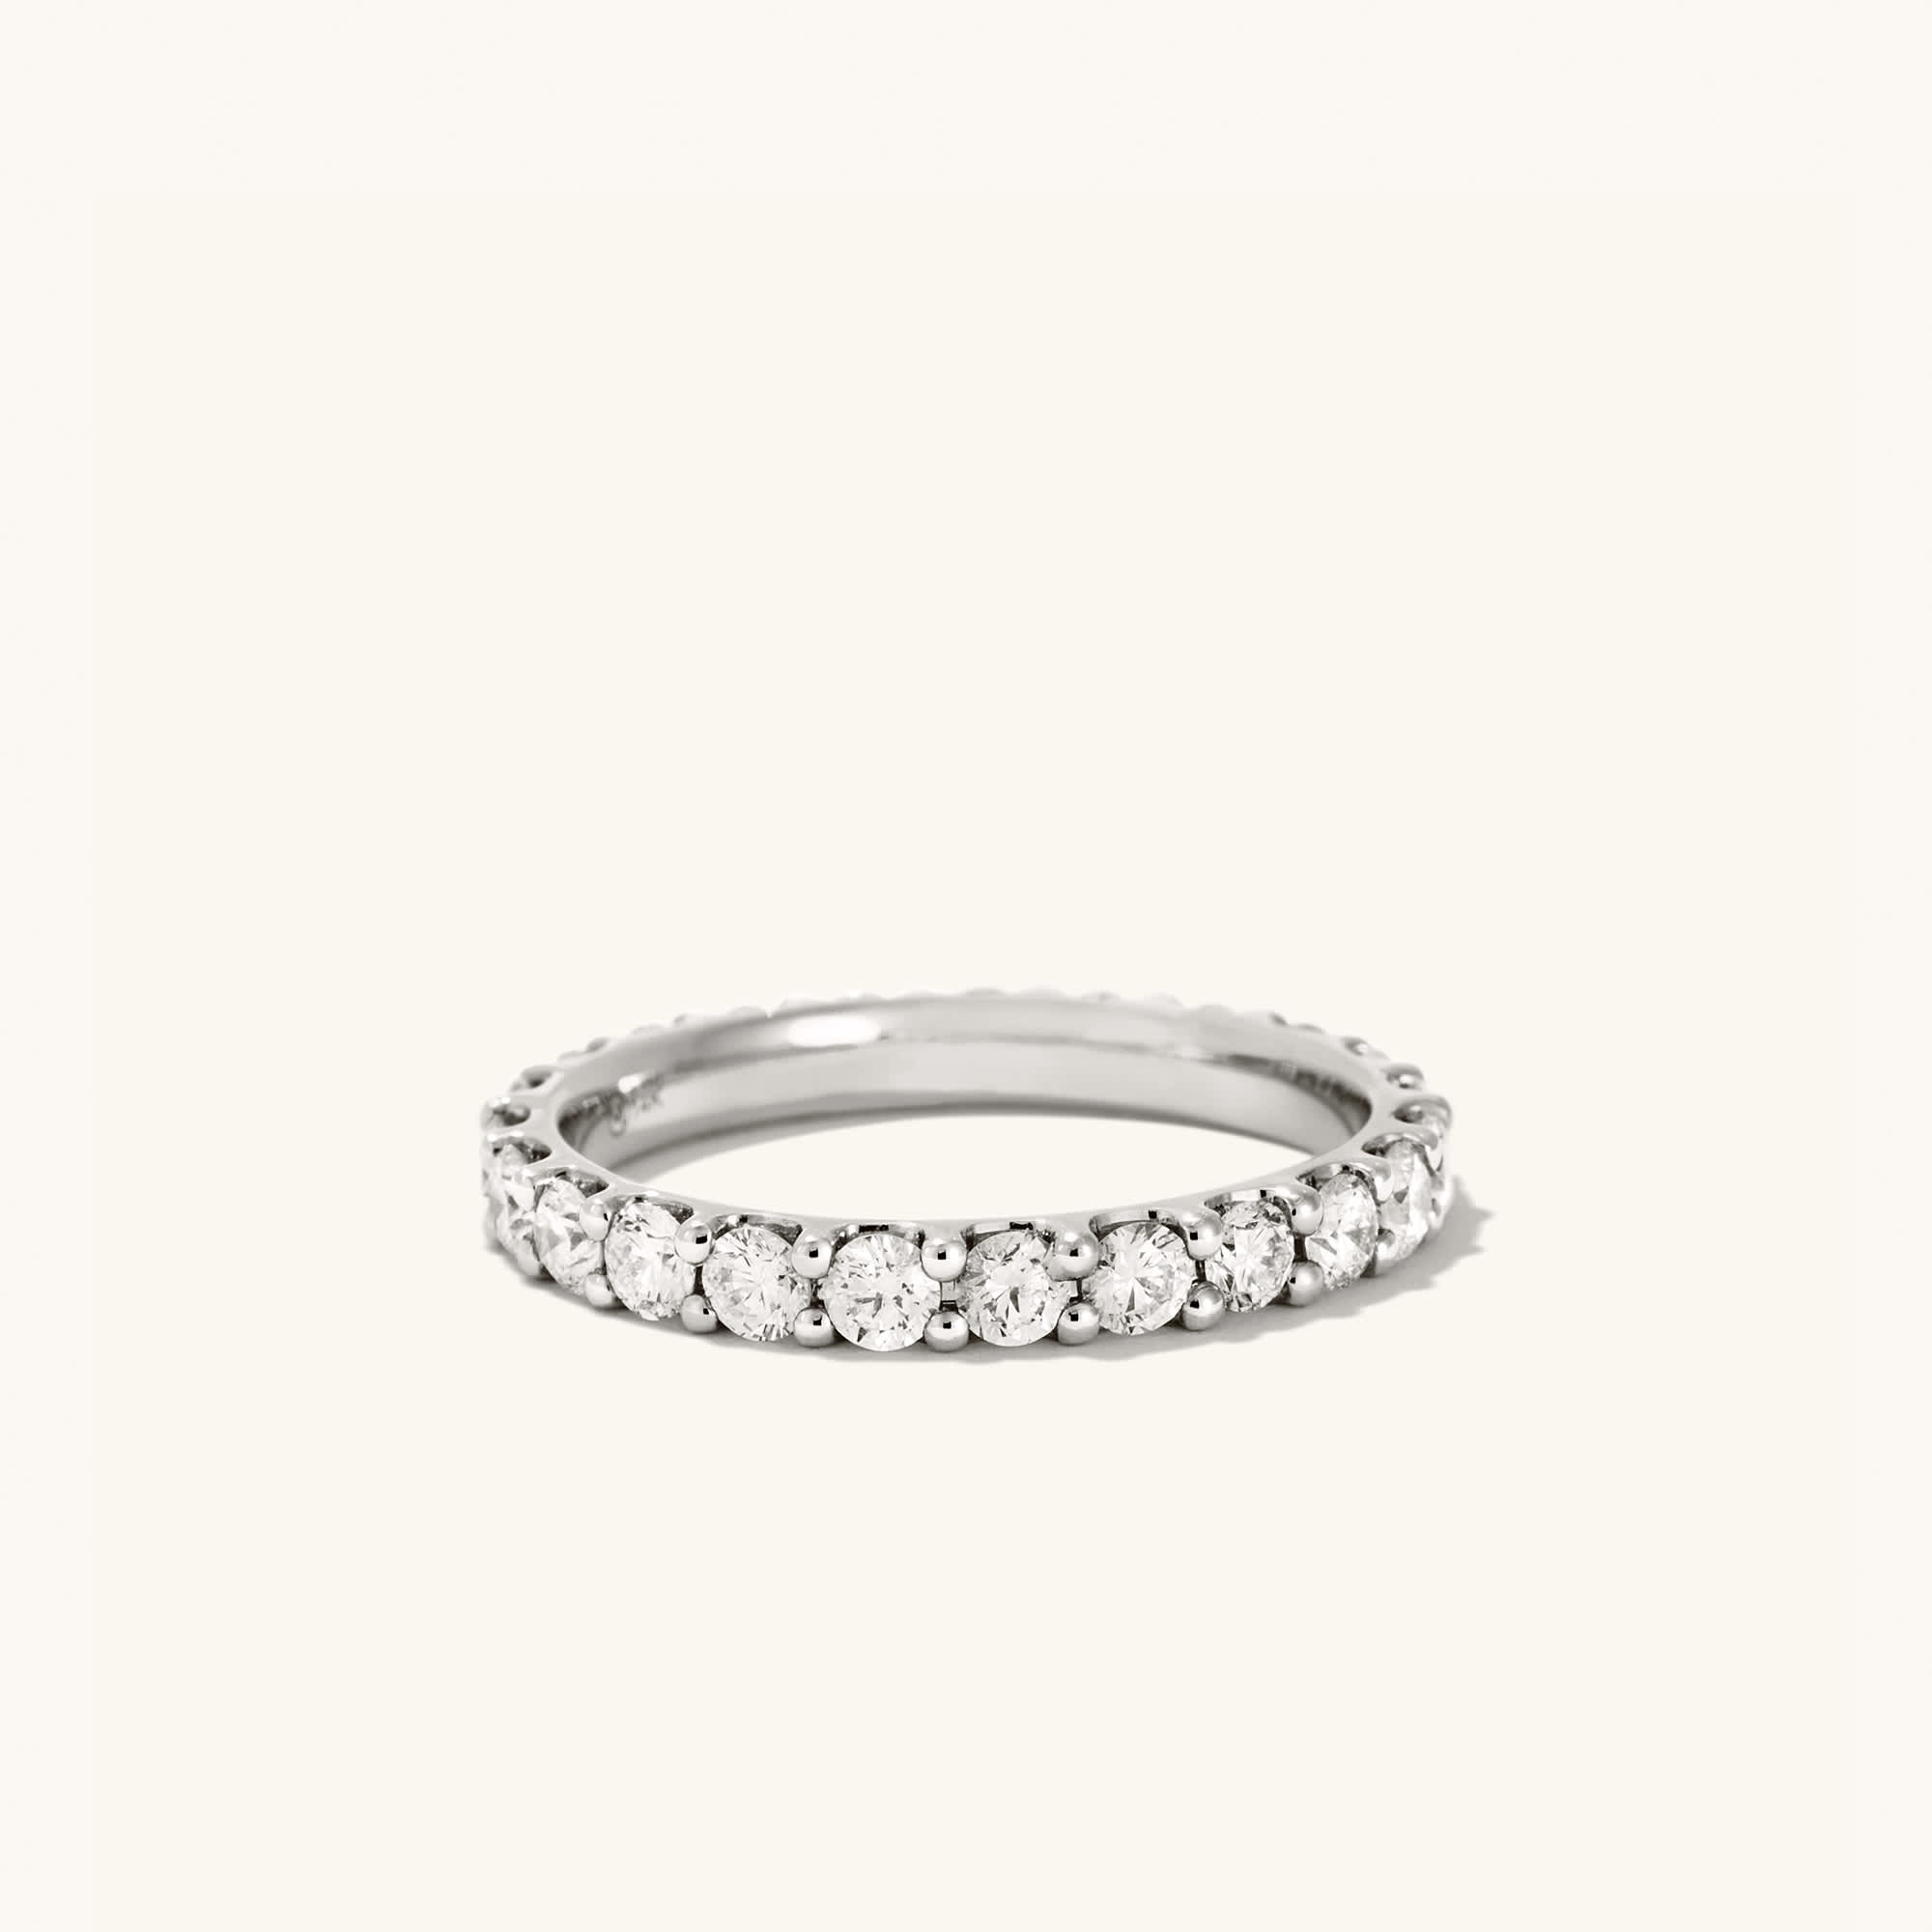 11 Fashion-Girl Approved Engagement Rings | Who What Wear